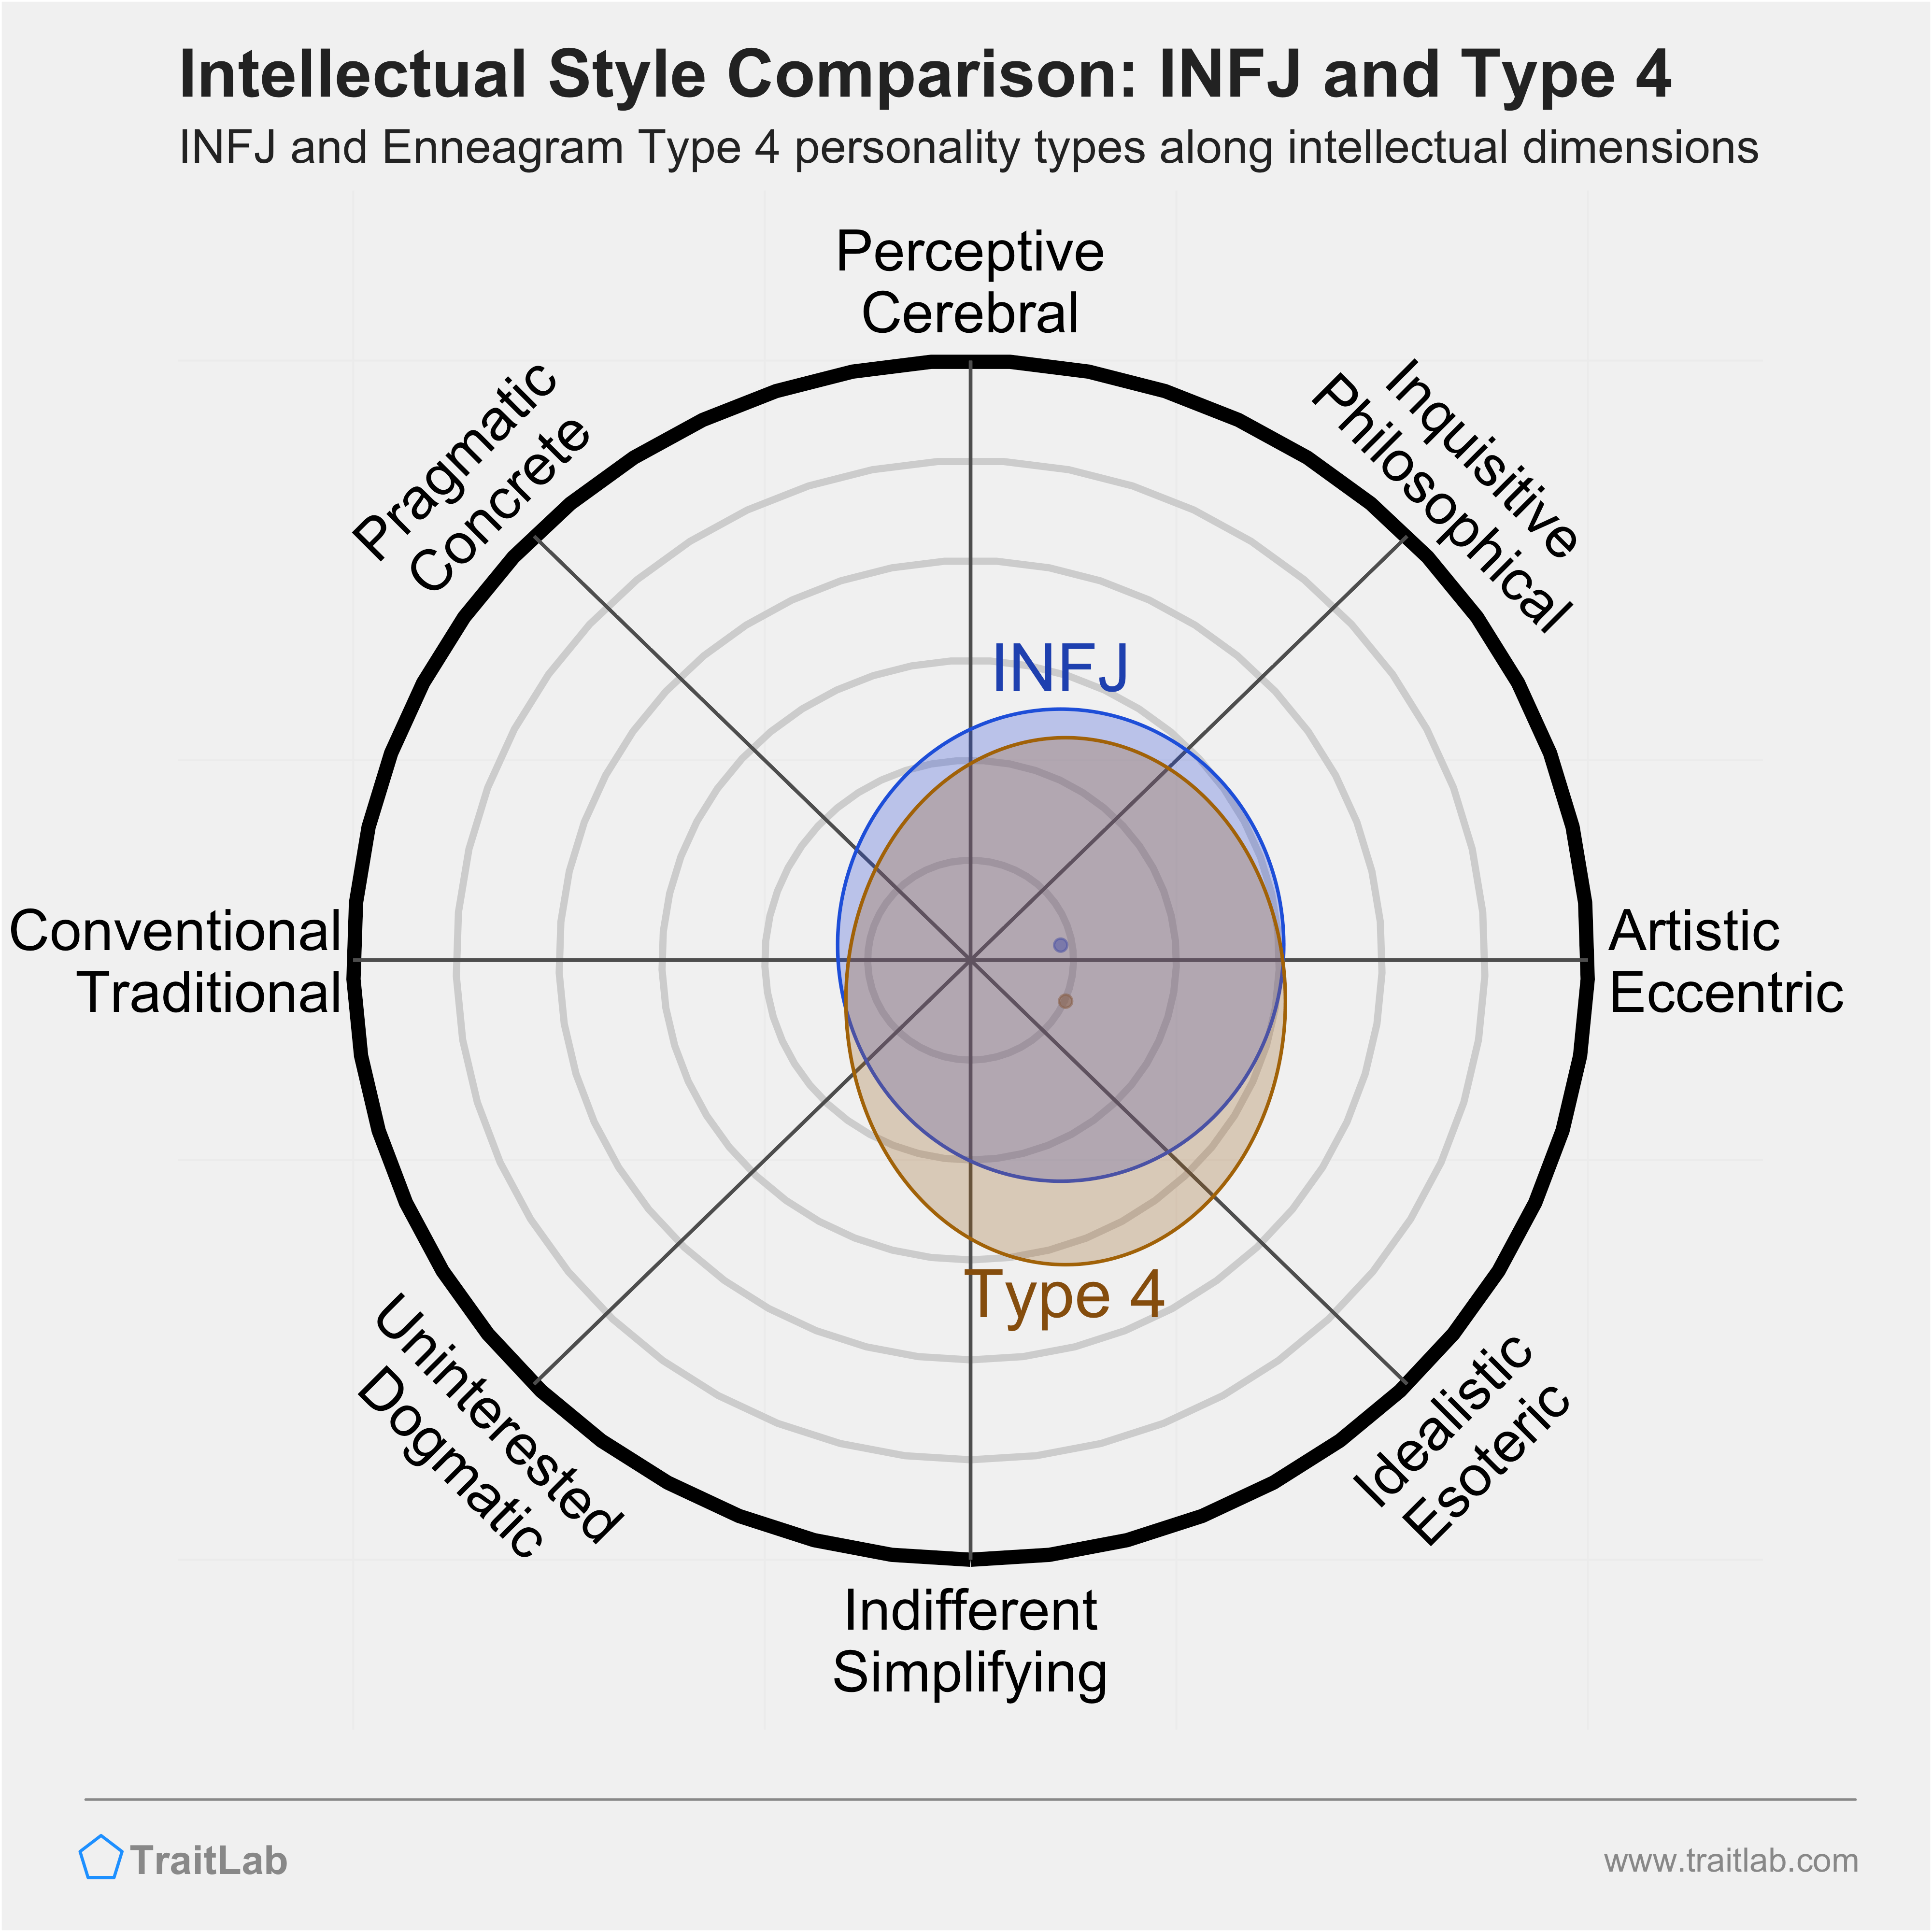 INFJ and Type 4 comparison across intellectual dimensions